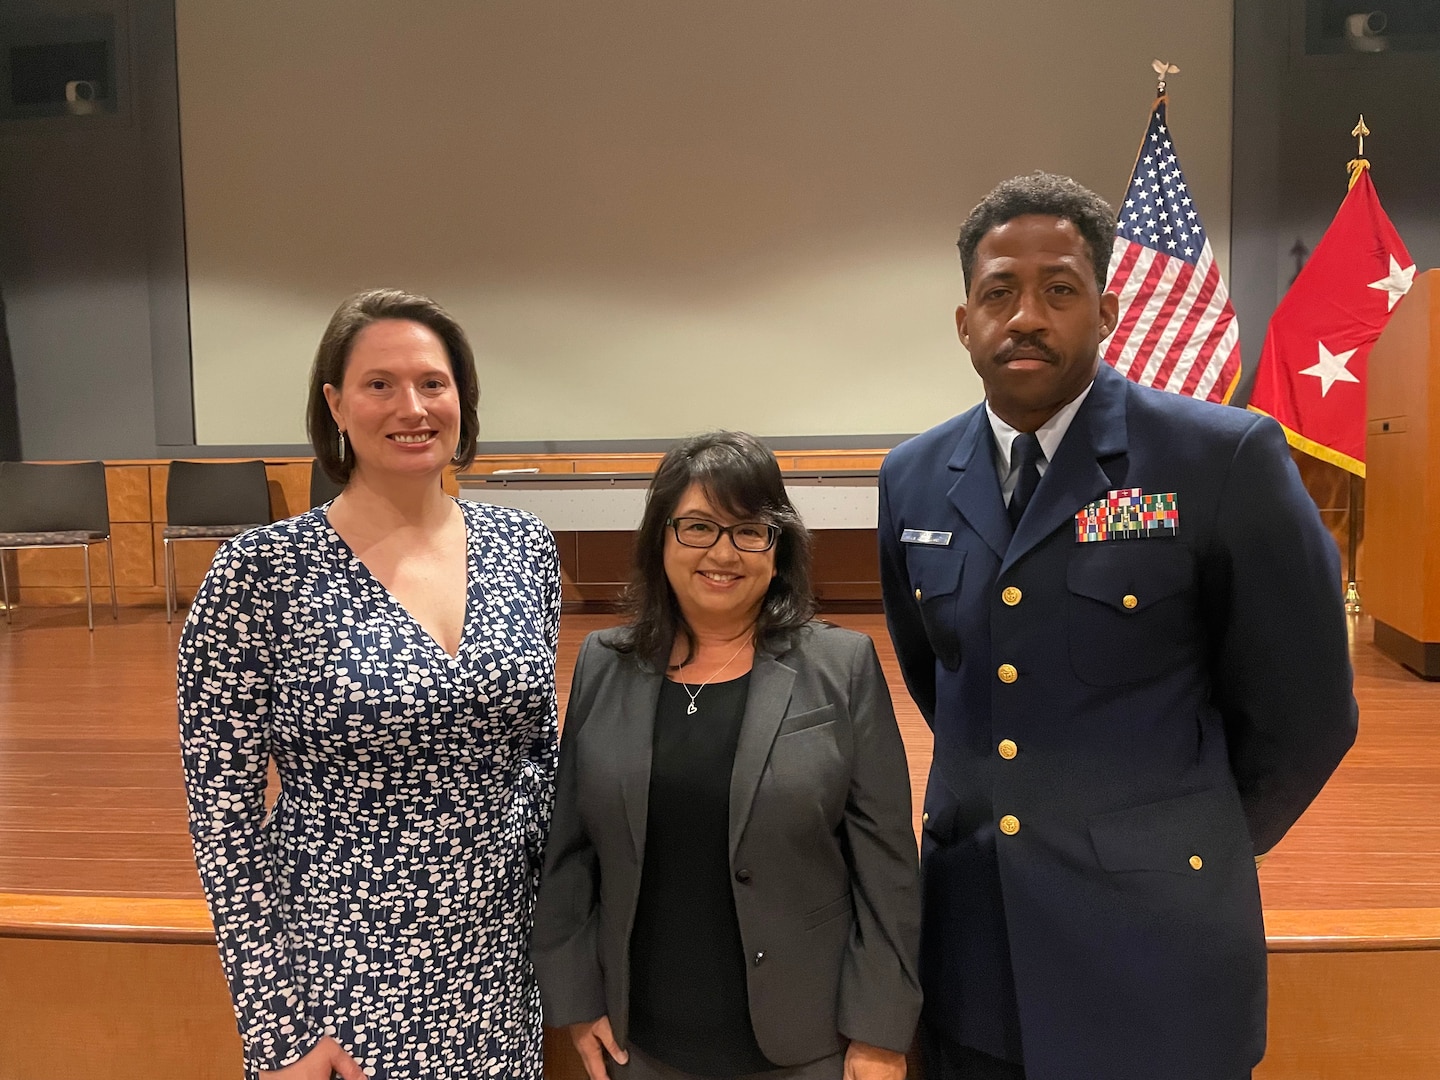 Lianne Casupang, District 14’s Sexual Assault Response Coordinator and the Coast Guard’s SARC of the Year for 2022, is recognized during a ceremony at the Mark Center in Washington, D.C, May 17, 2022. Pictured from left to right: Lindsay Charles, Coast Guard SAPRR Oversight & Policy Office Chief, Lianne Casupang, and Cmdr. Michael Wolfe, Coast Guard Liaison to the Department of Defense Sexual Assault Prevention and Response Office. (U.S. Coast Guard photo.)